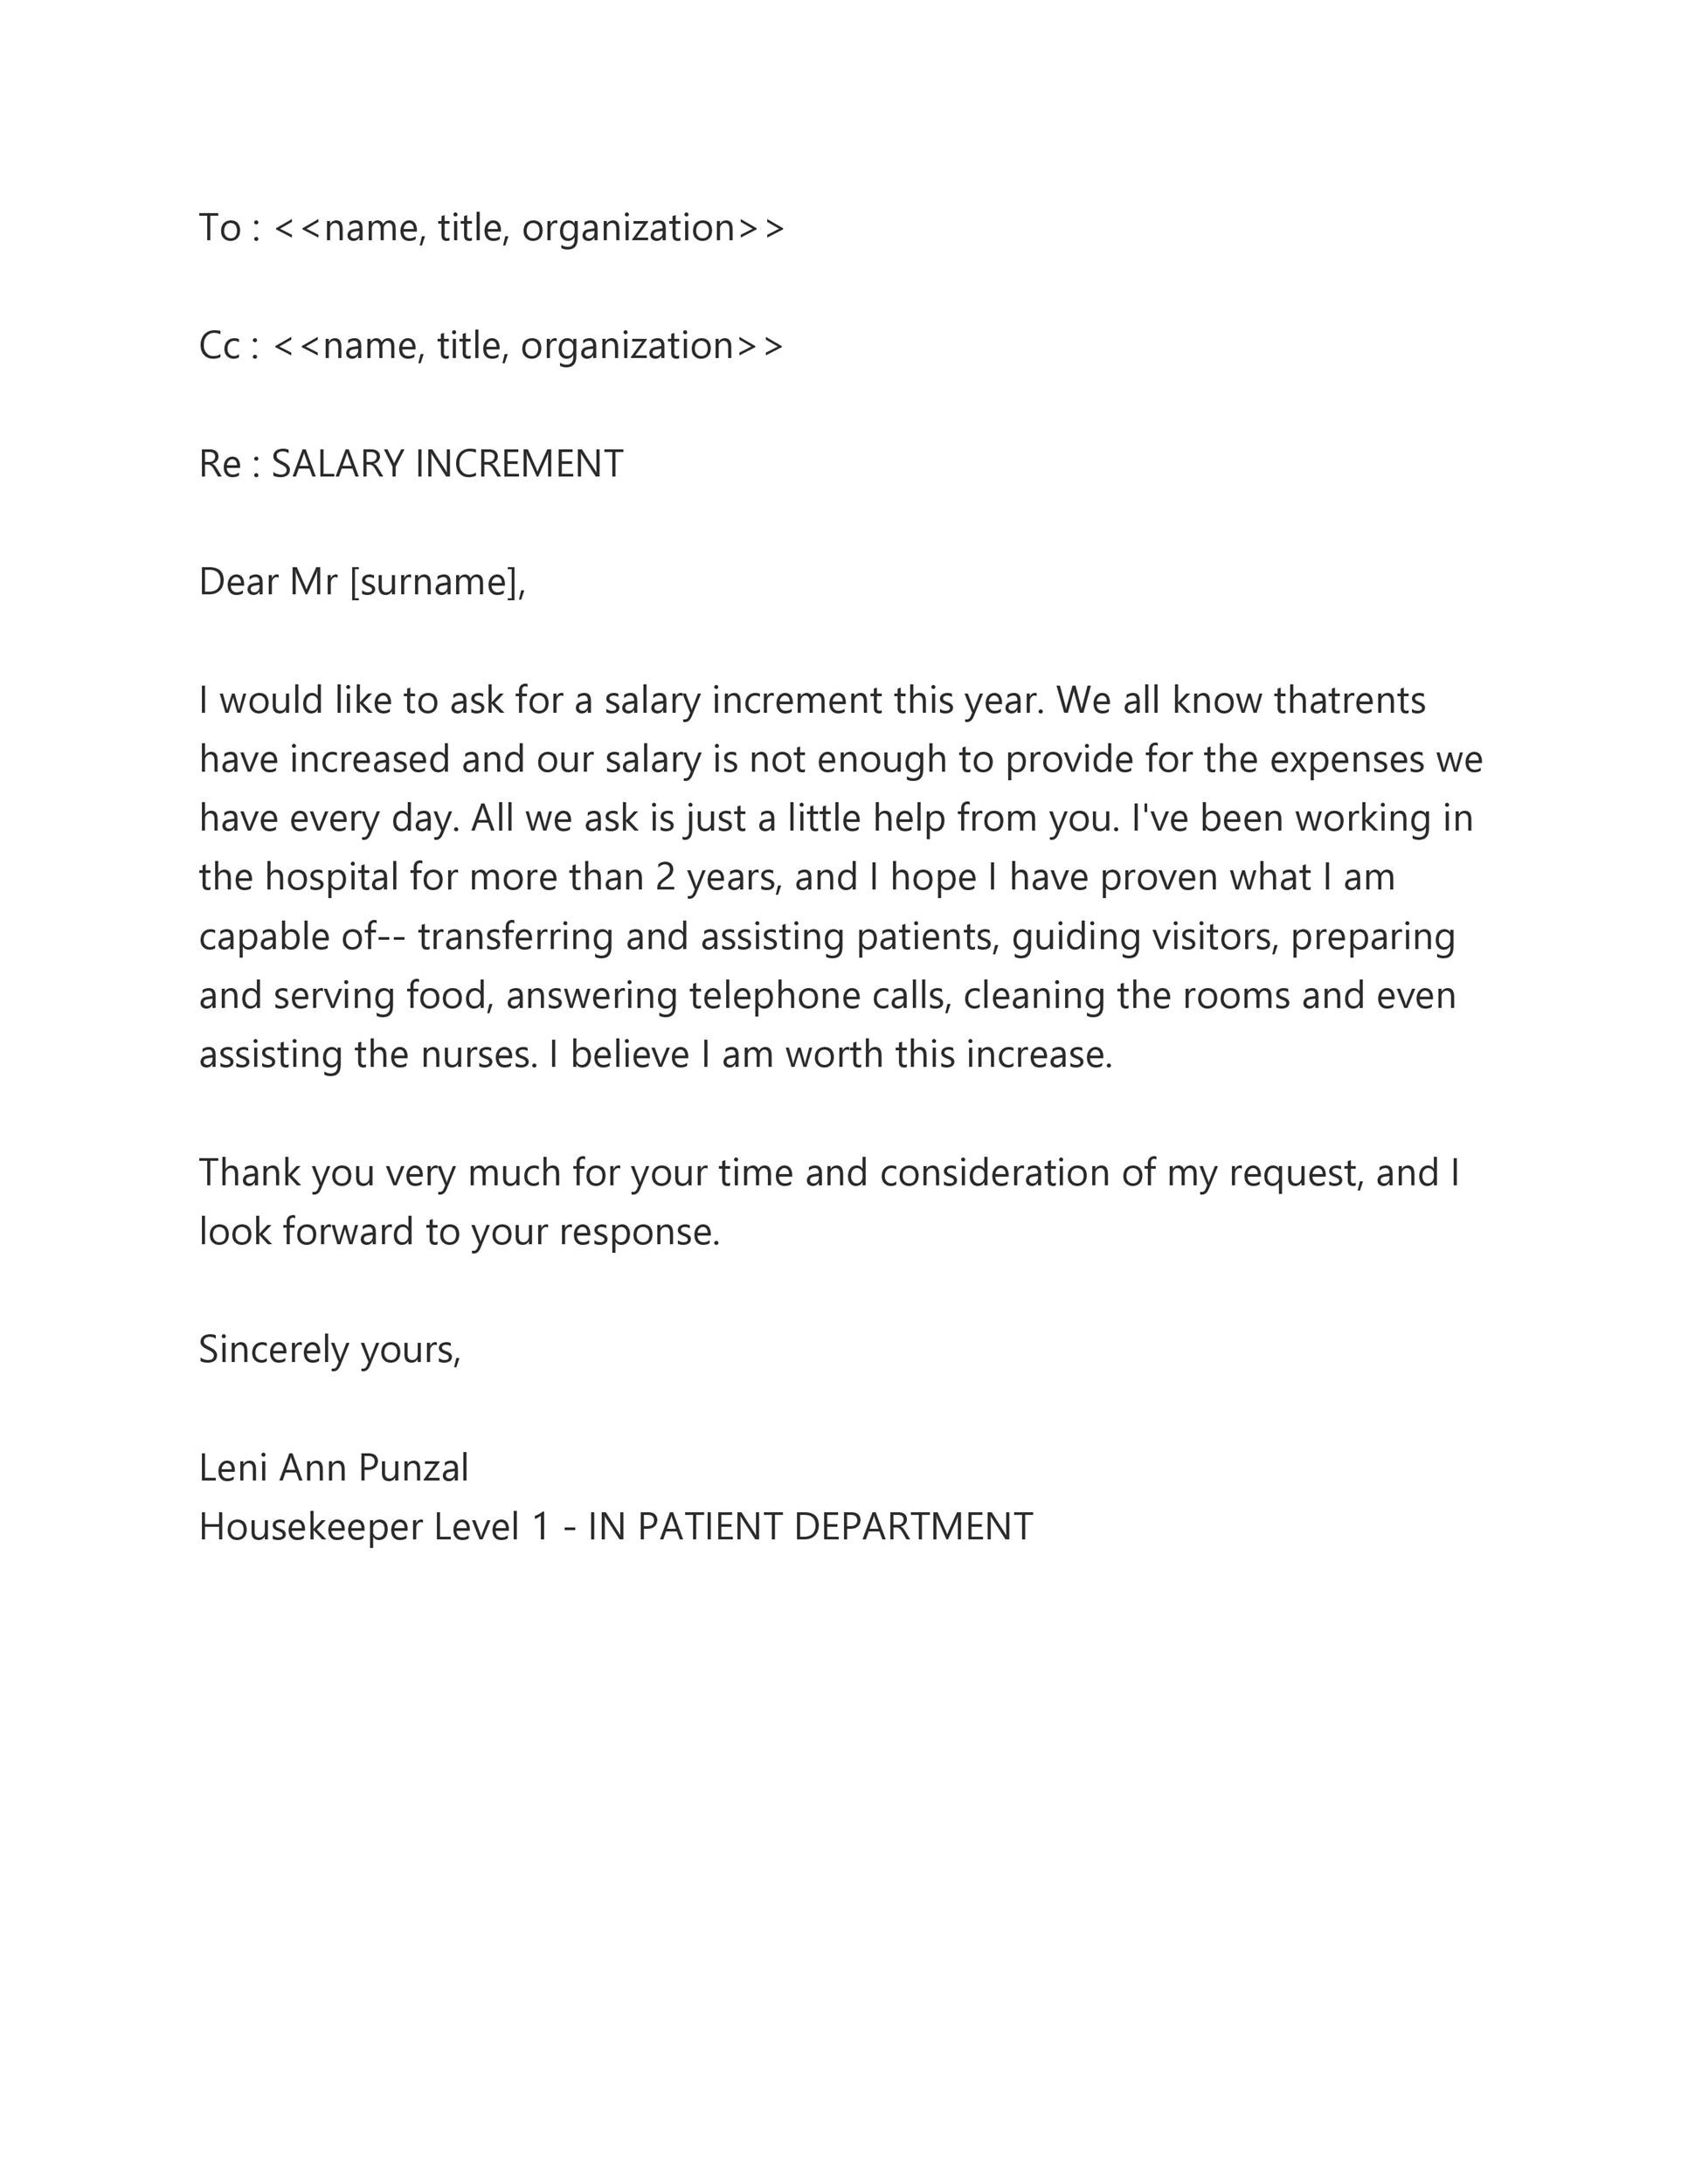 Pay Increase Letter To Give Employees from templatelab.com